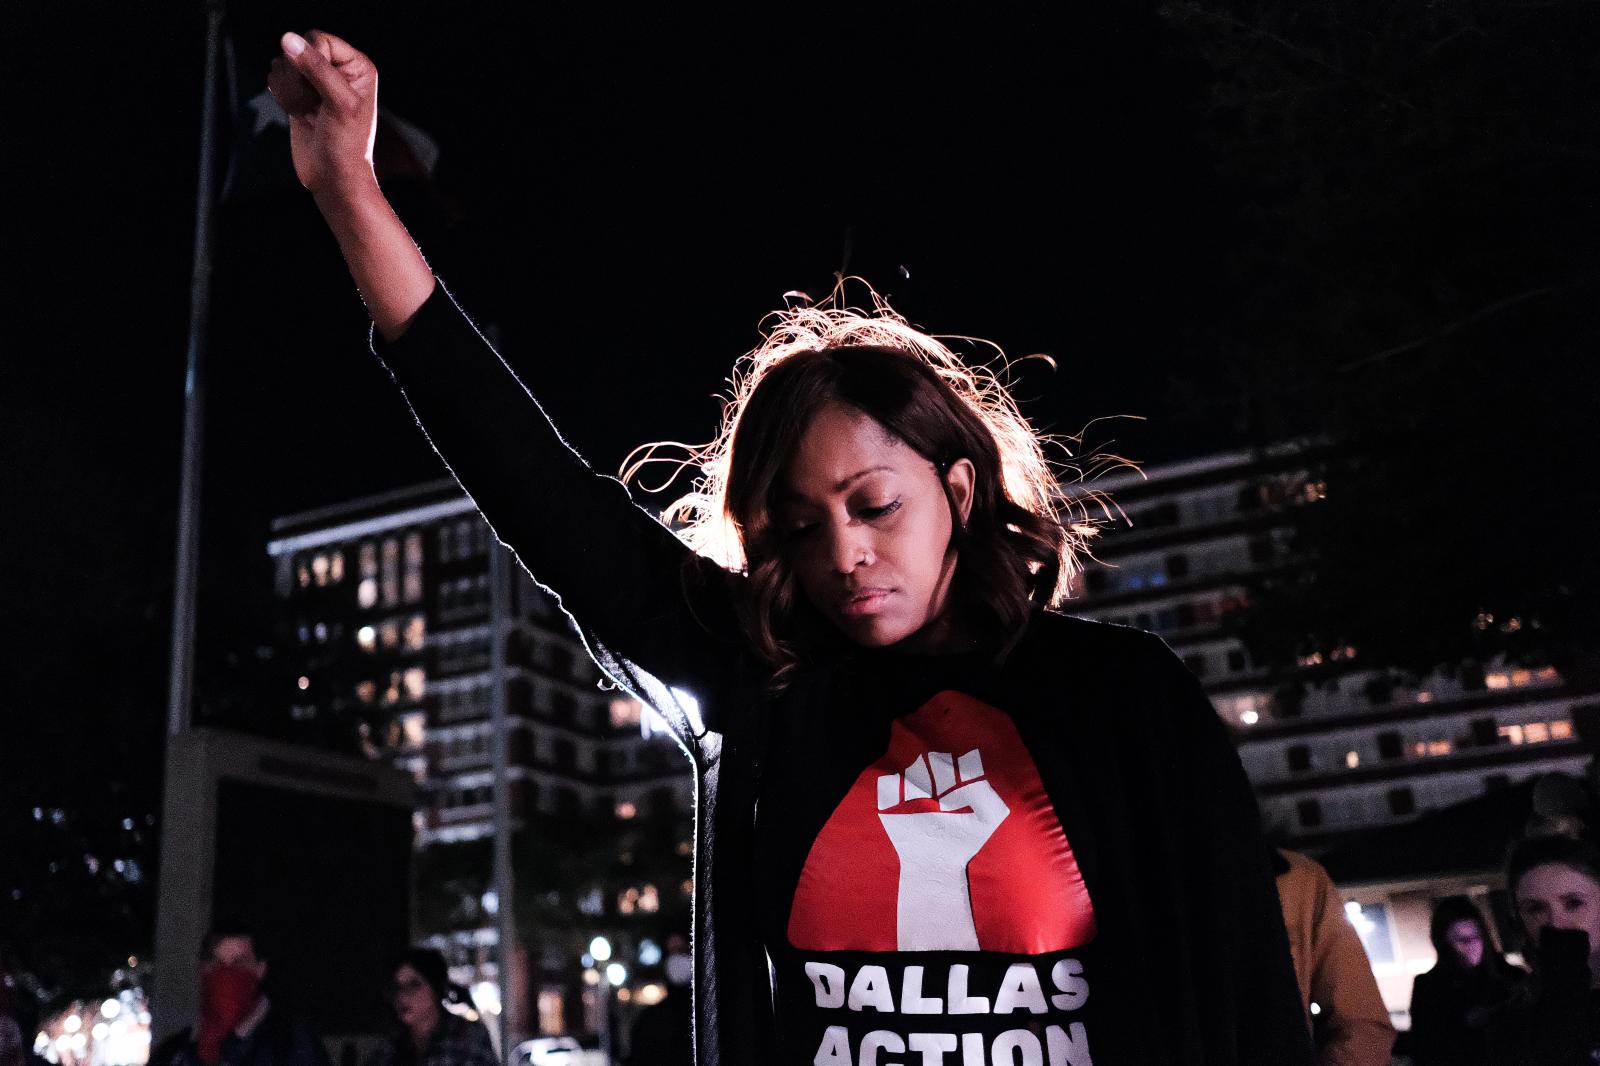 TRYE_NICHOLES_DALLAS_PROTEST | Buy this image